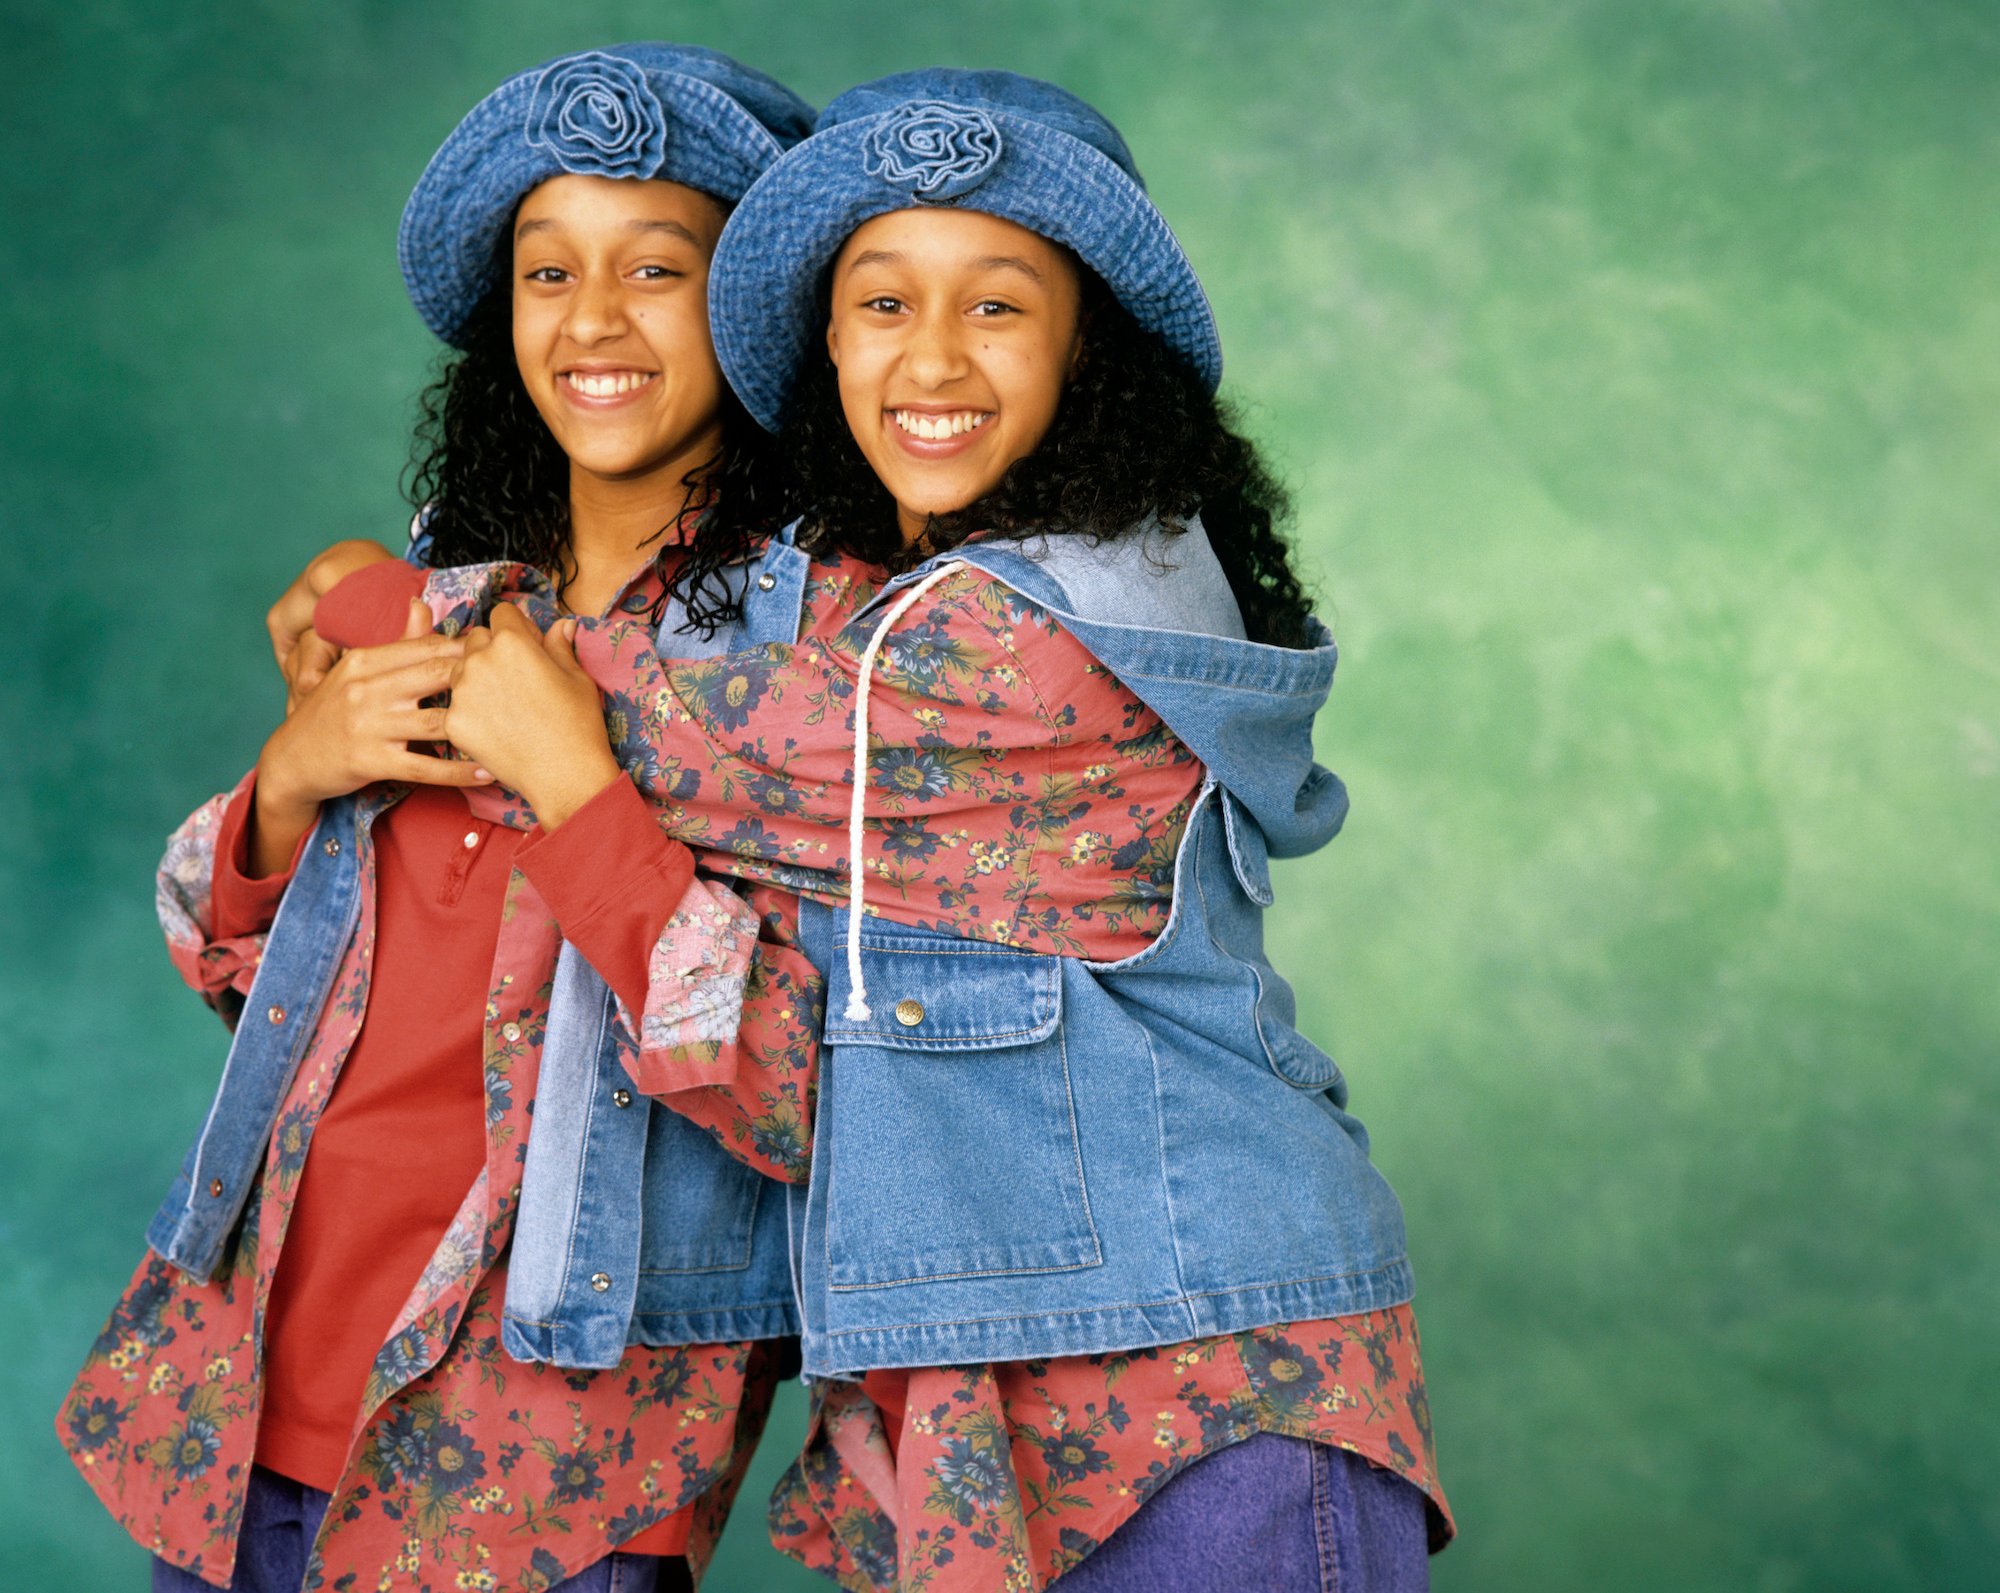 (L-R) Tia Mowry and Tamera Mowry smiling in front of a green background